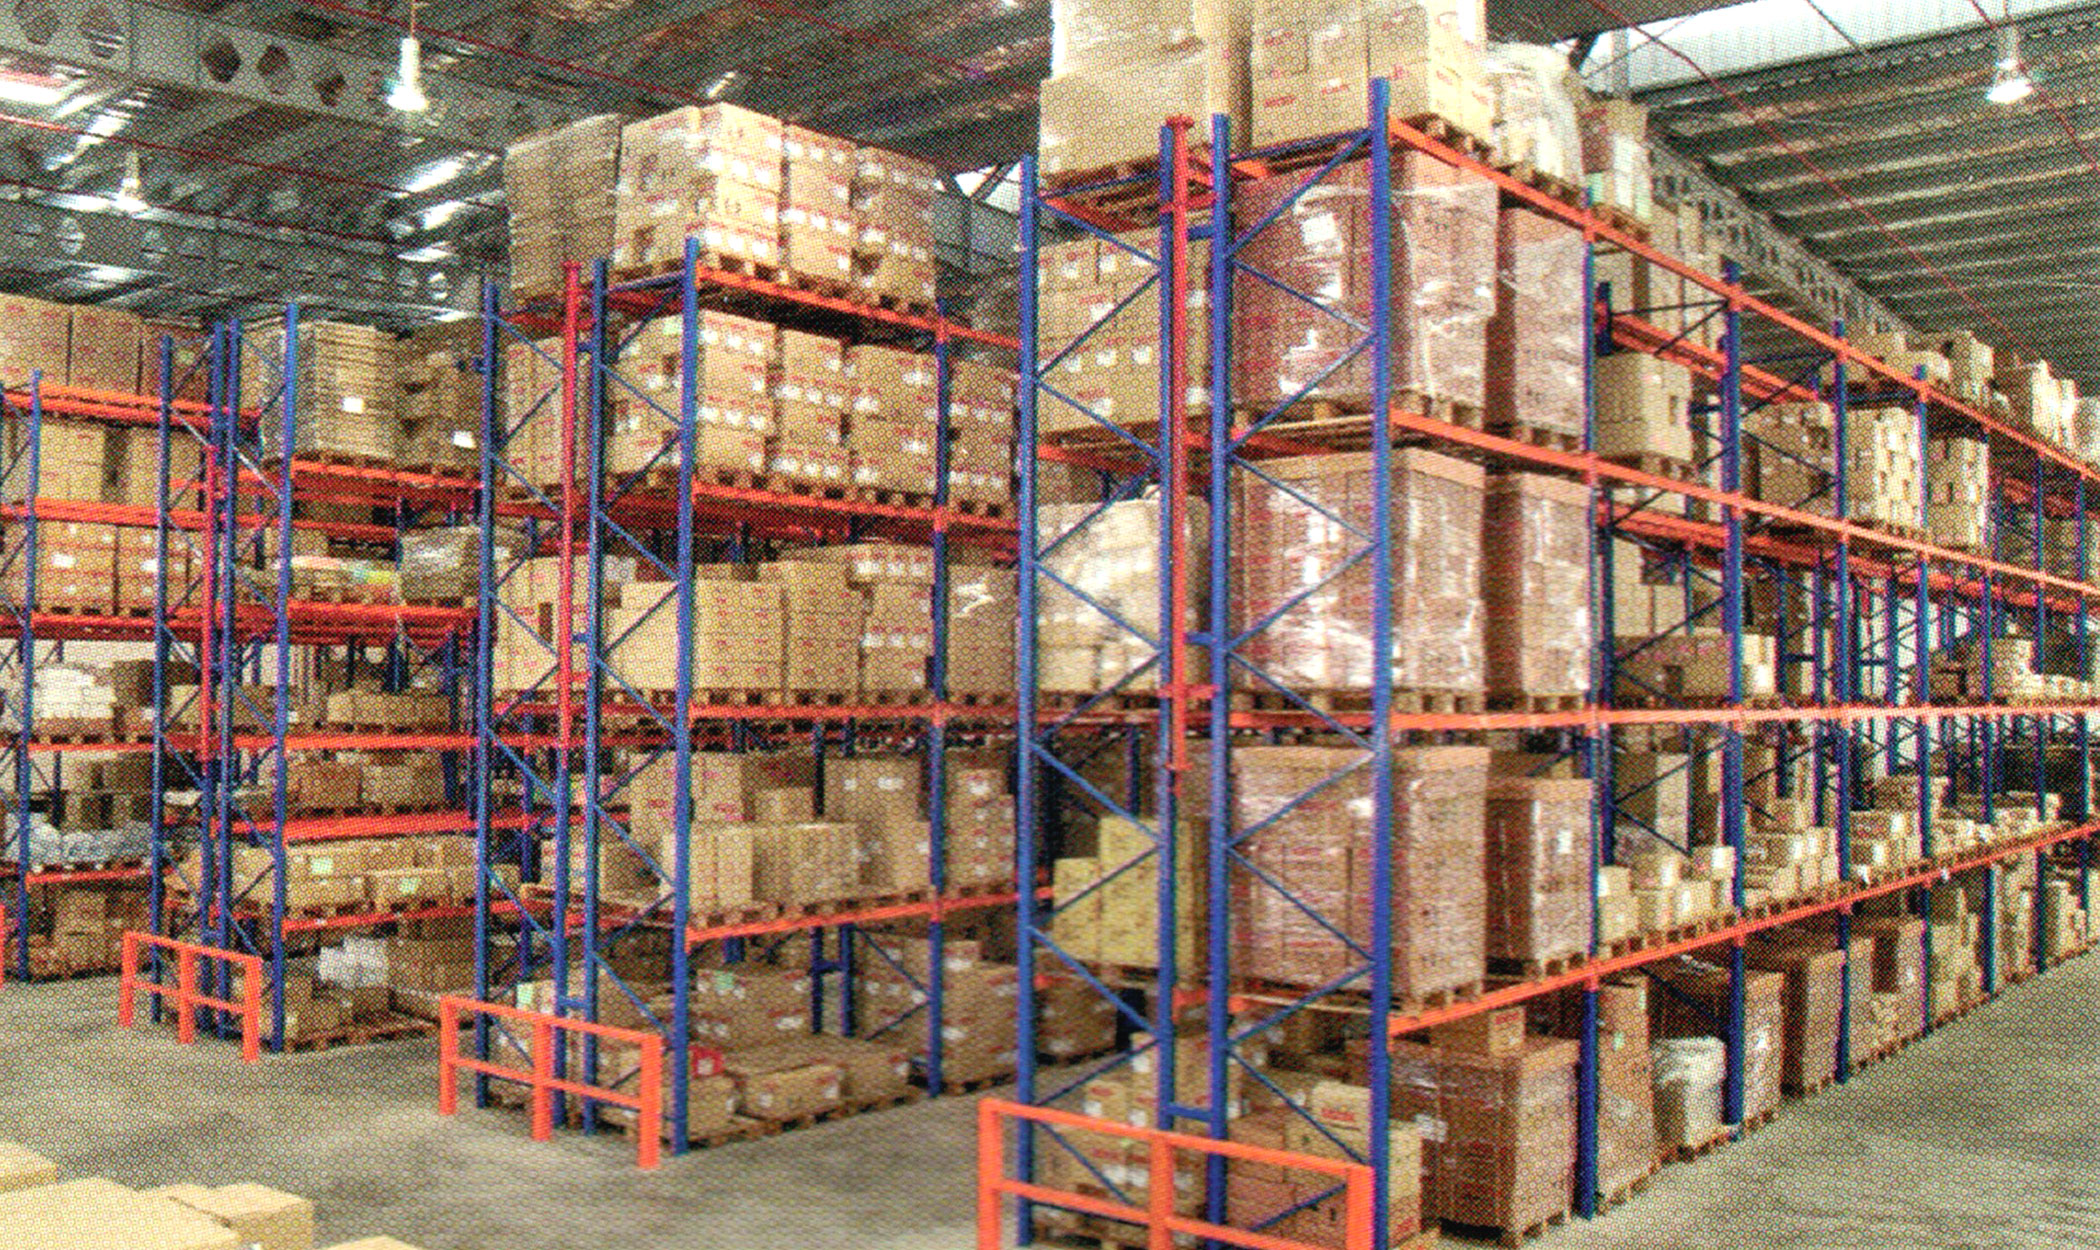 Stationery manufacturing facility selective racking